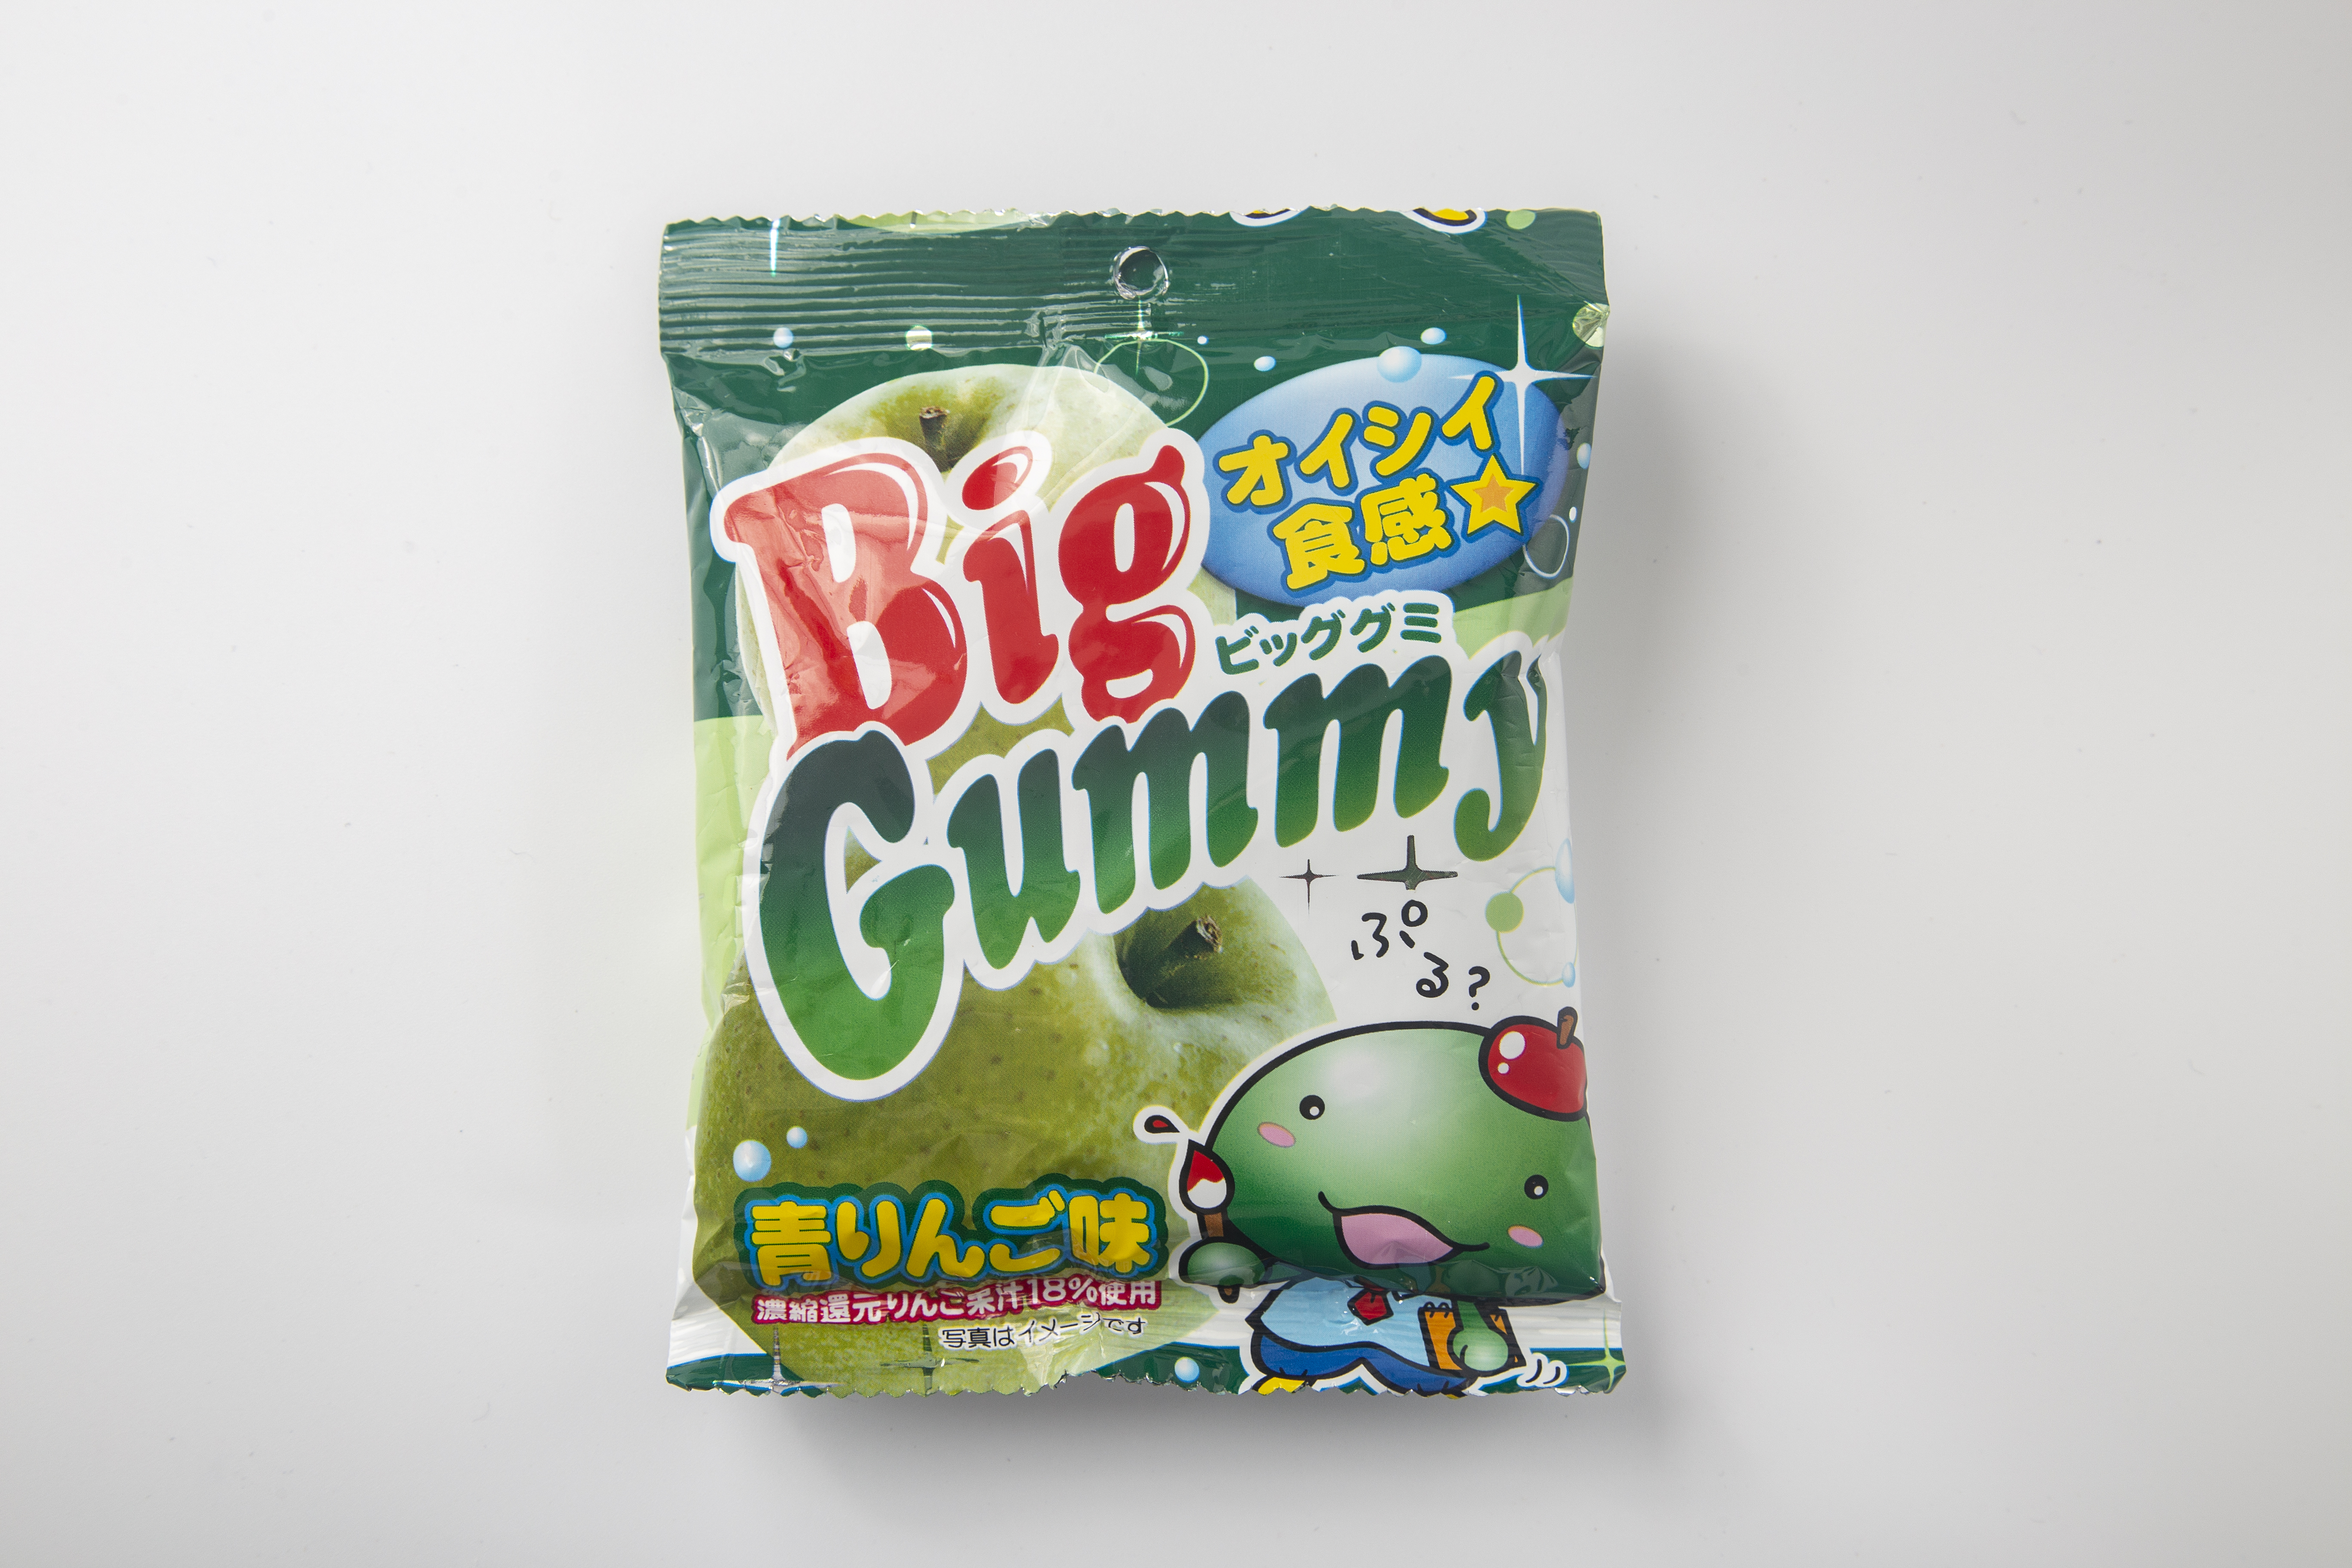 Every day gummy candy 